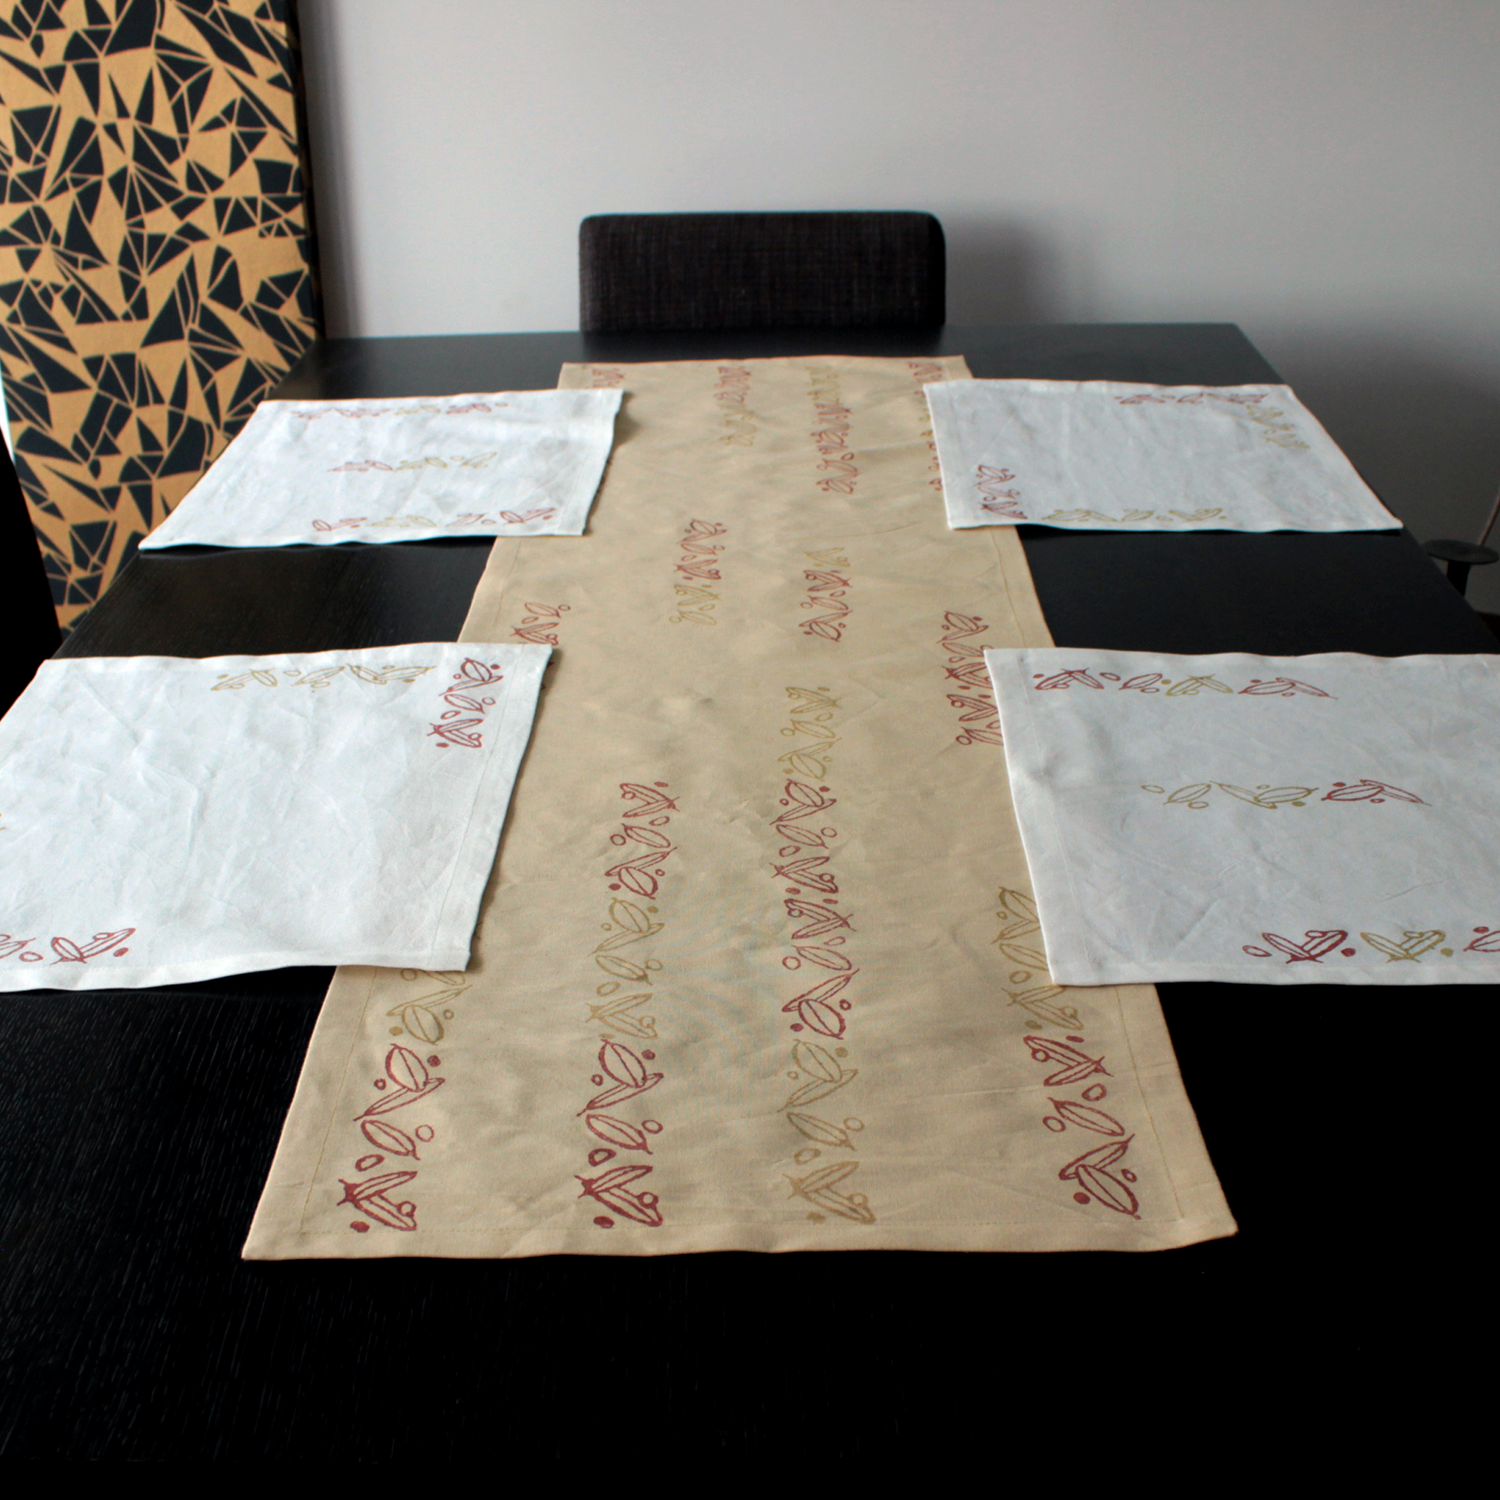 Mediterranean-Inspired Olive Block Print Linen Placemats and Runner Set - Rustic Table Decor in Terracotta and Ochre